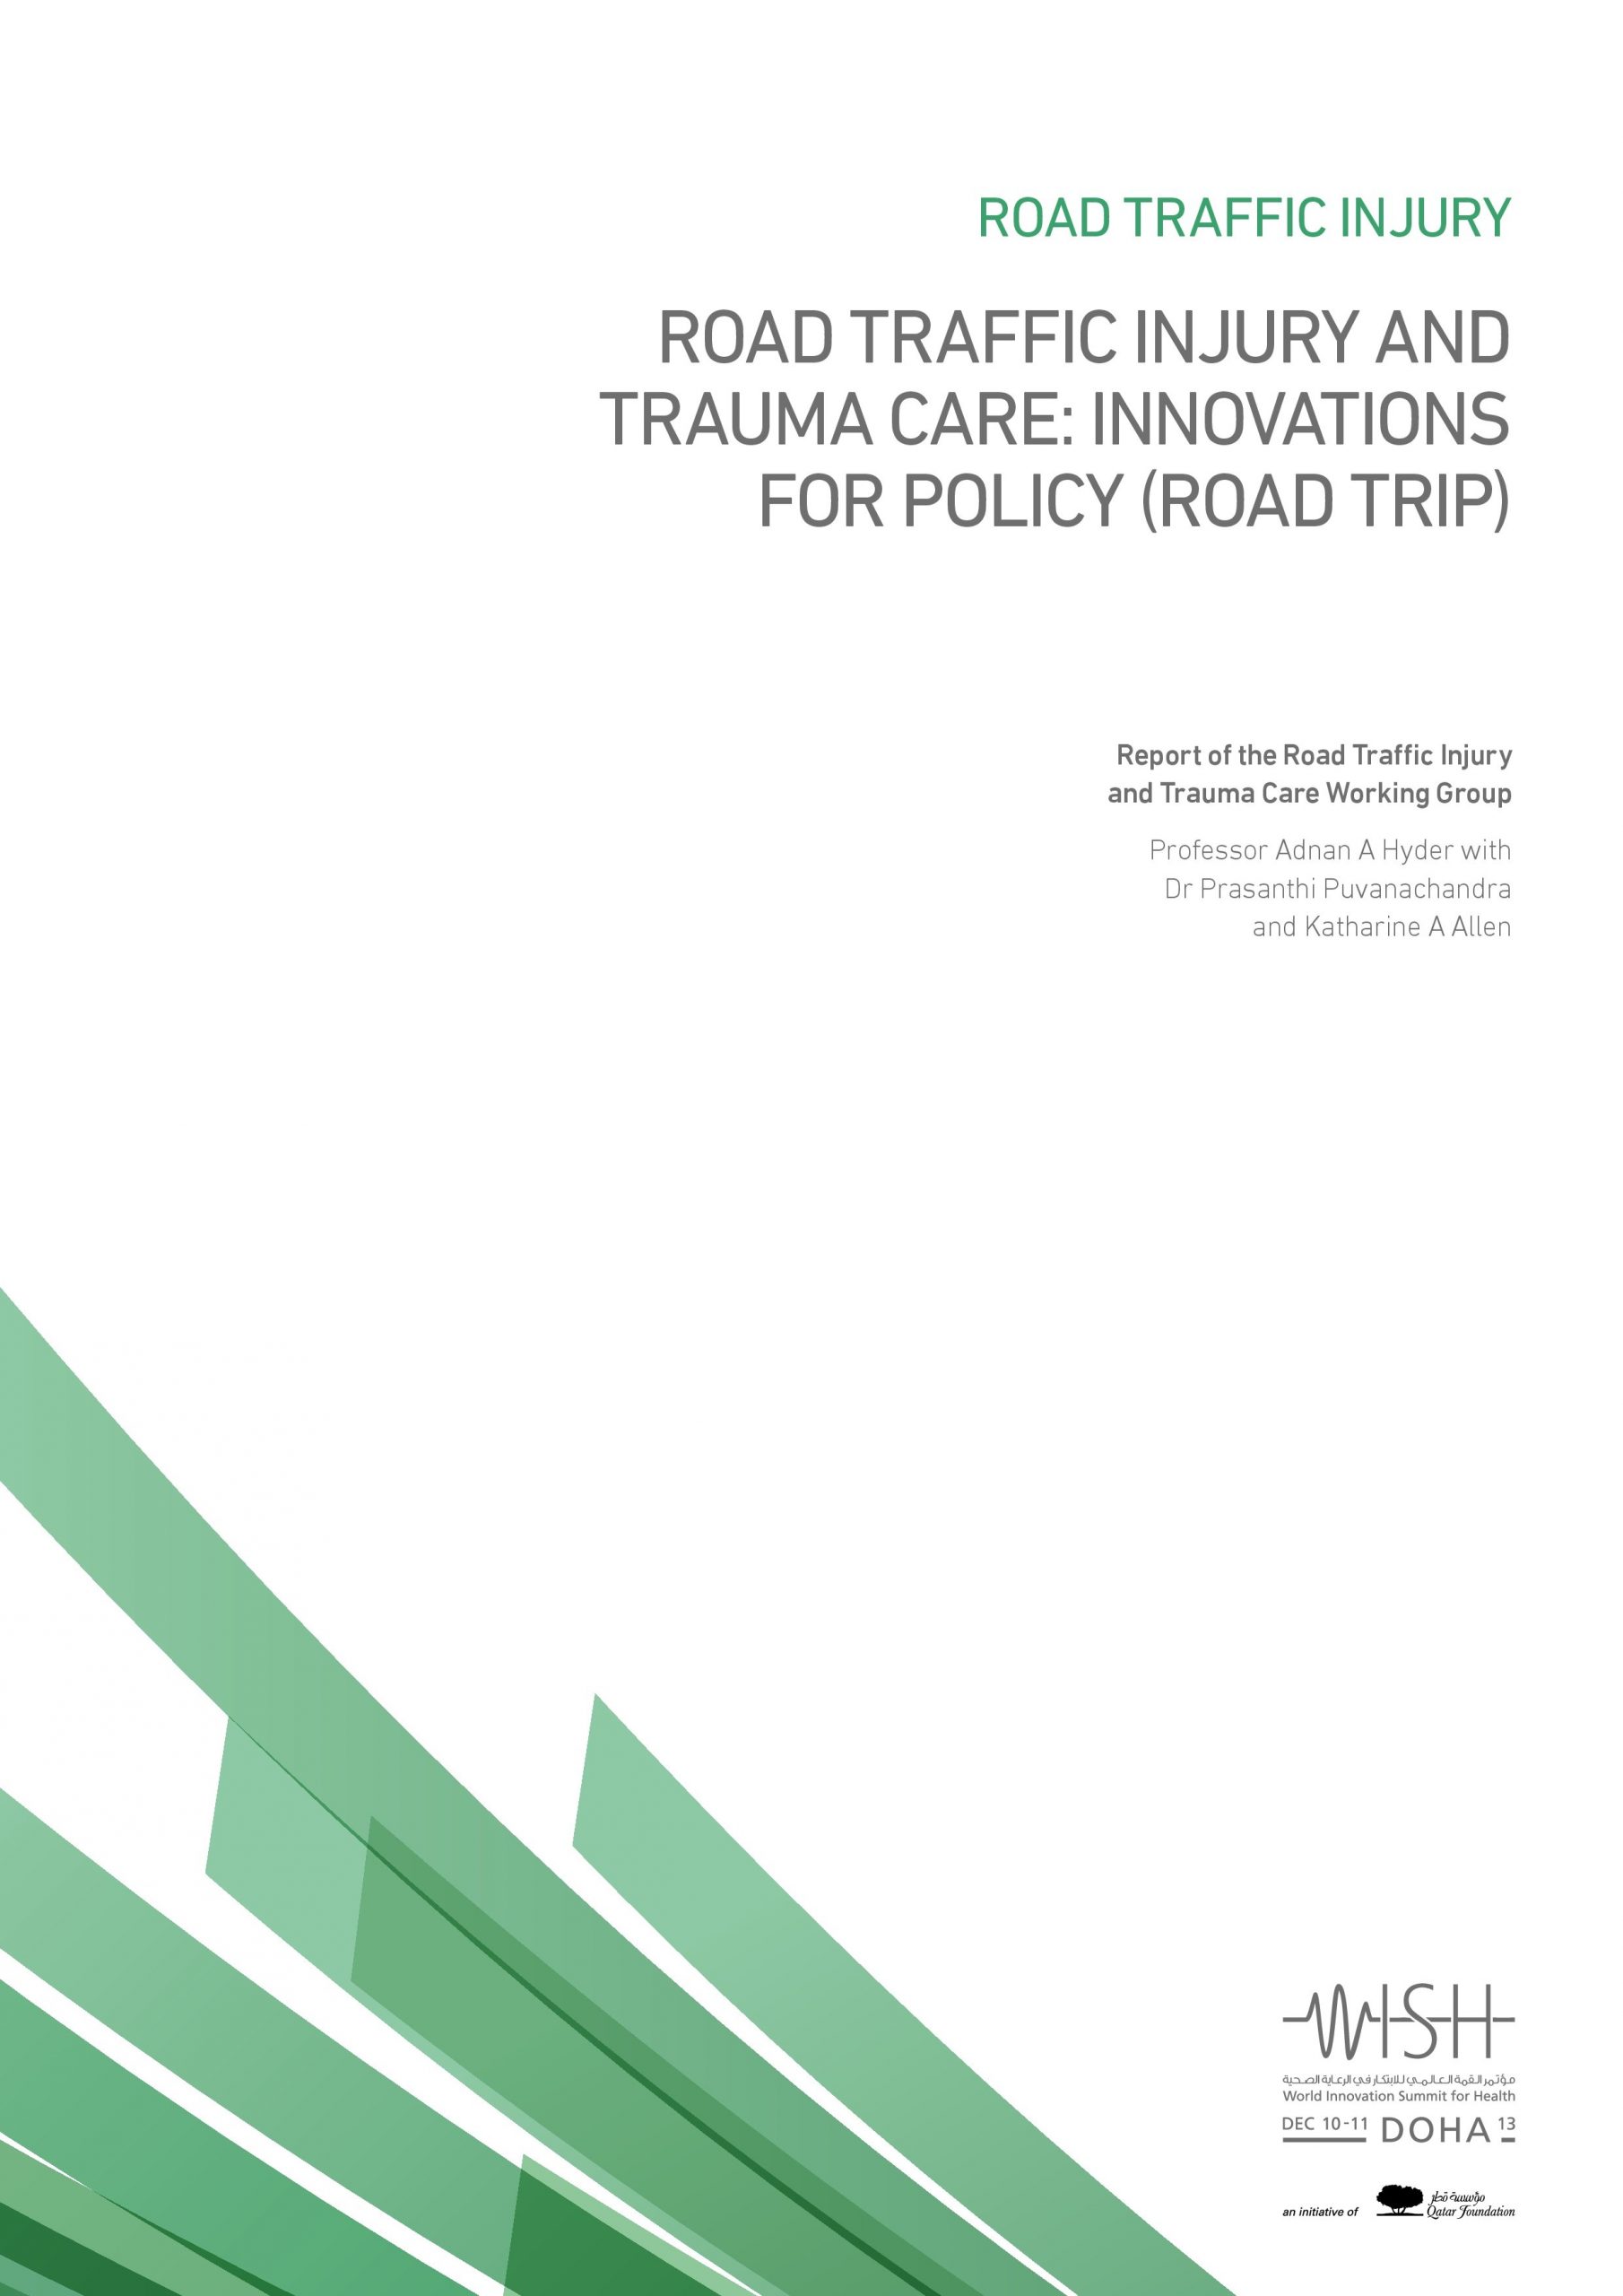 Road Traffic Injury and Trauma Care: Innovations for Policy (Road Trip)